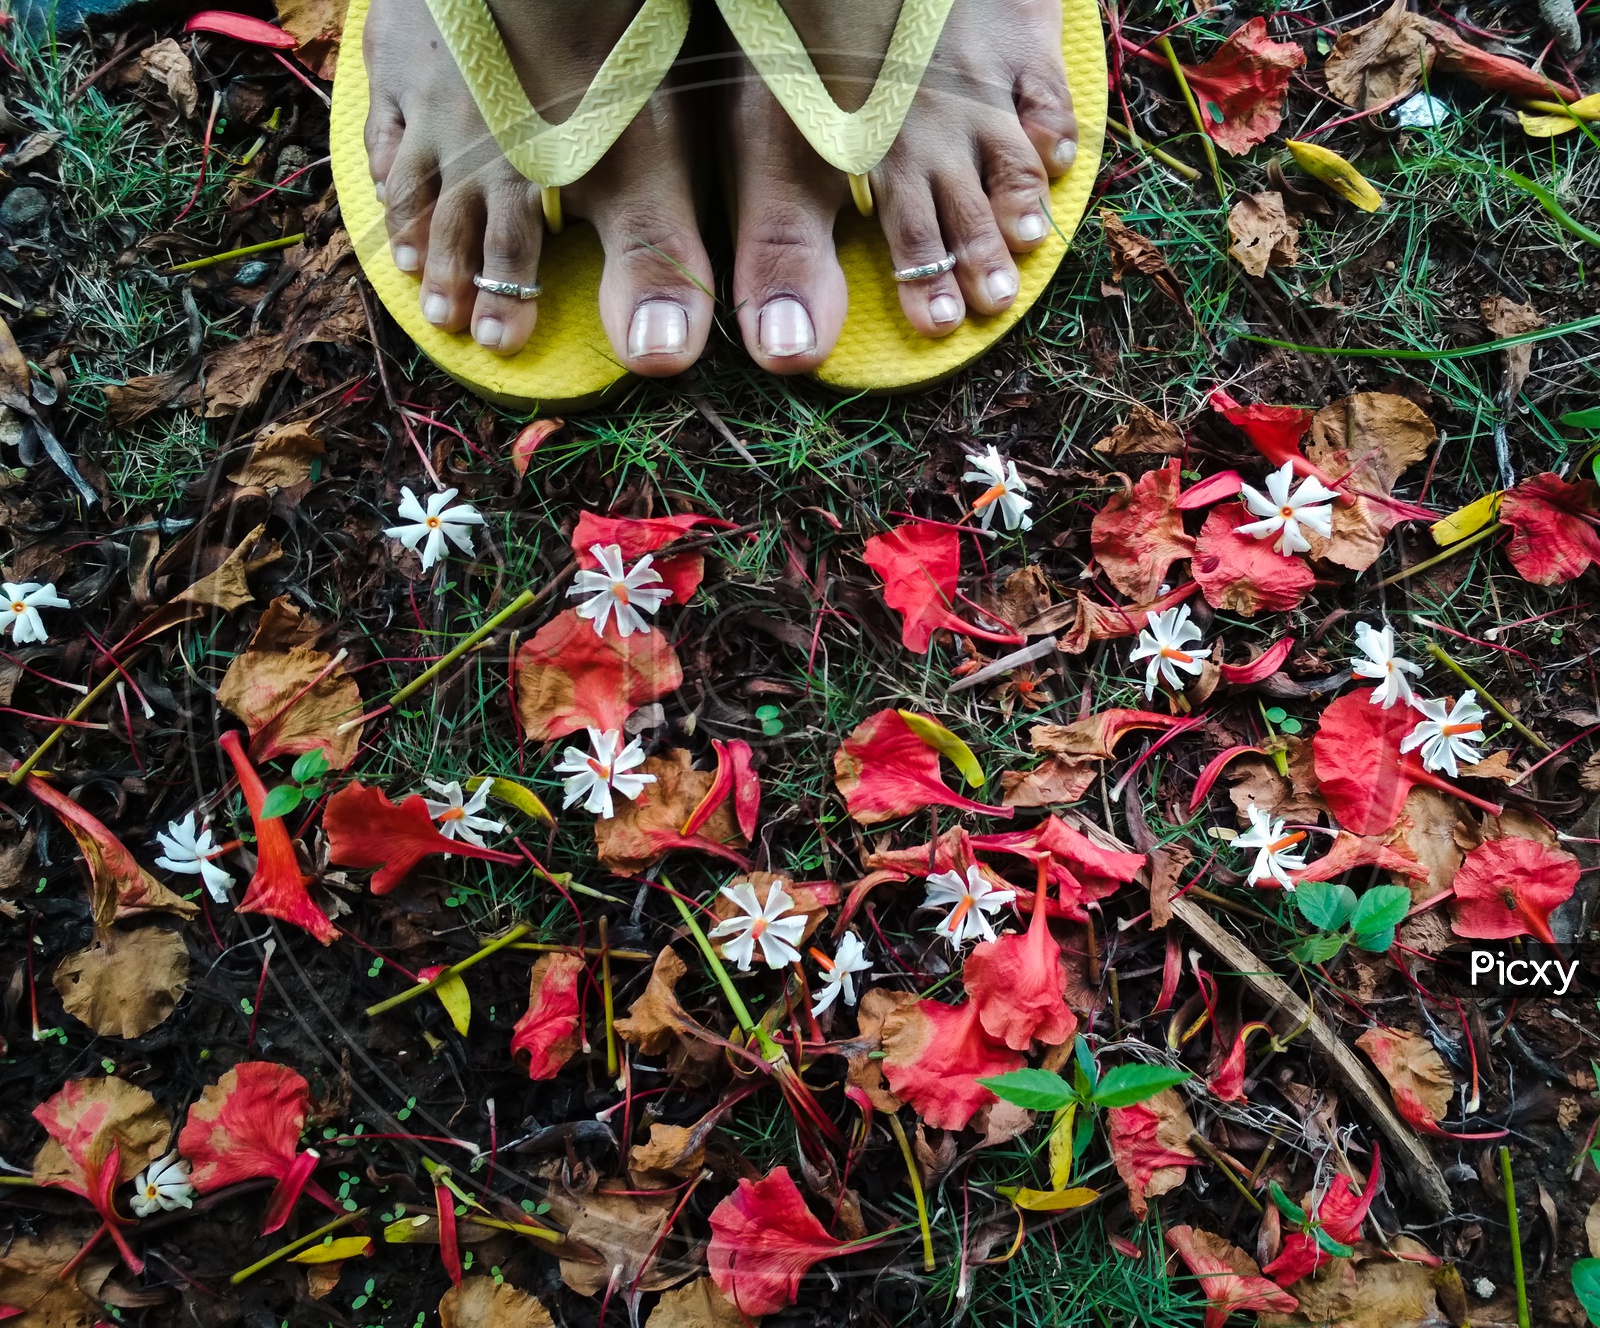 Foot an Indian Woman with yellow slippers and flower petals around